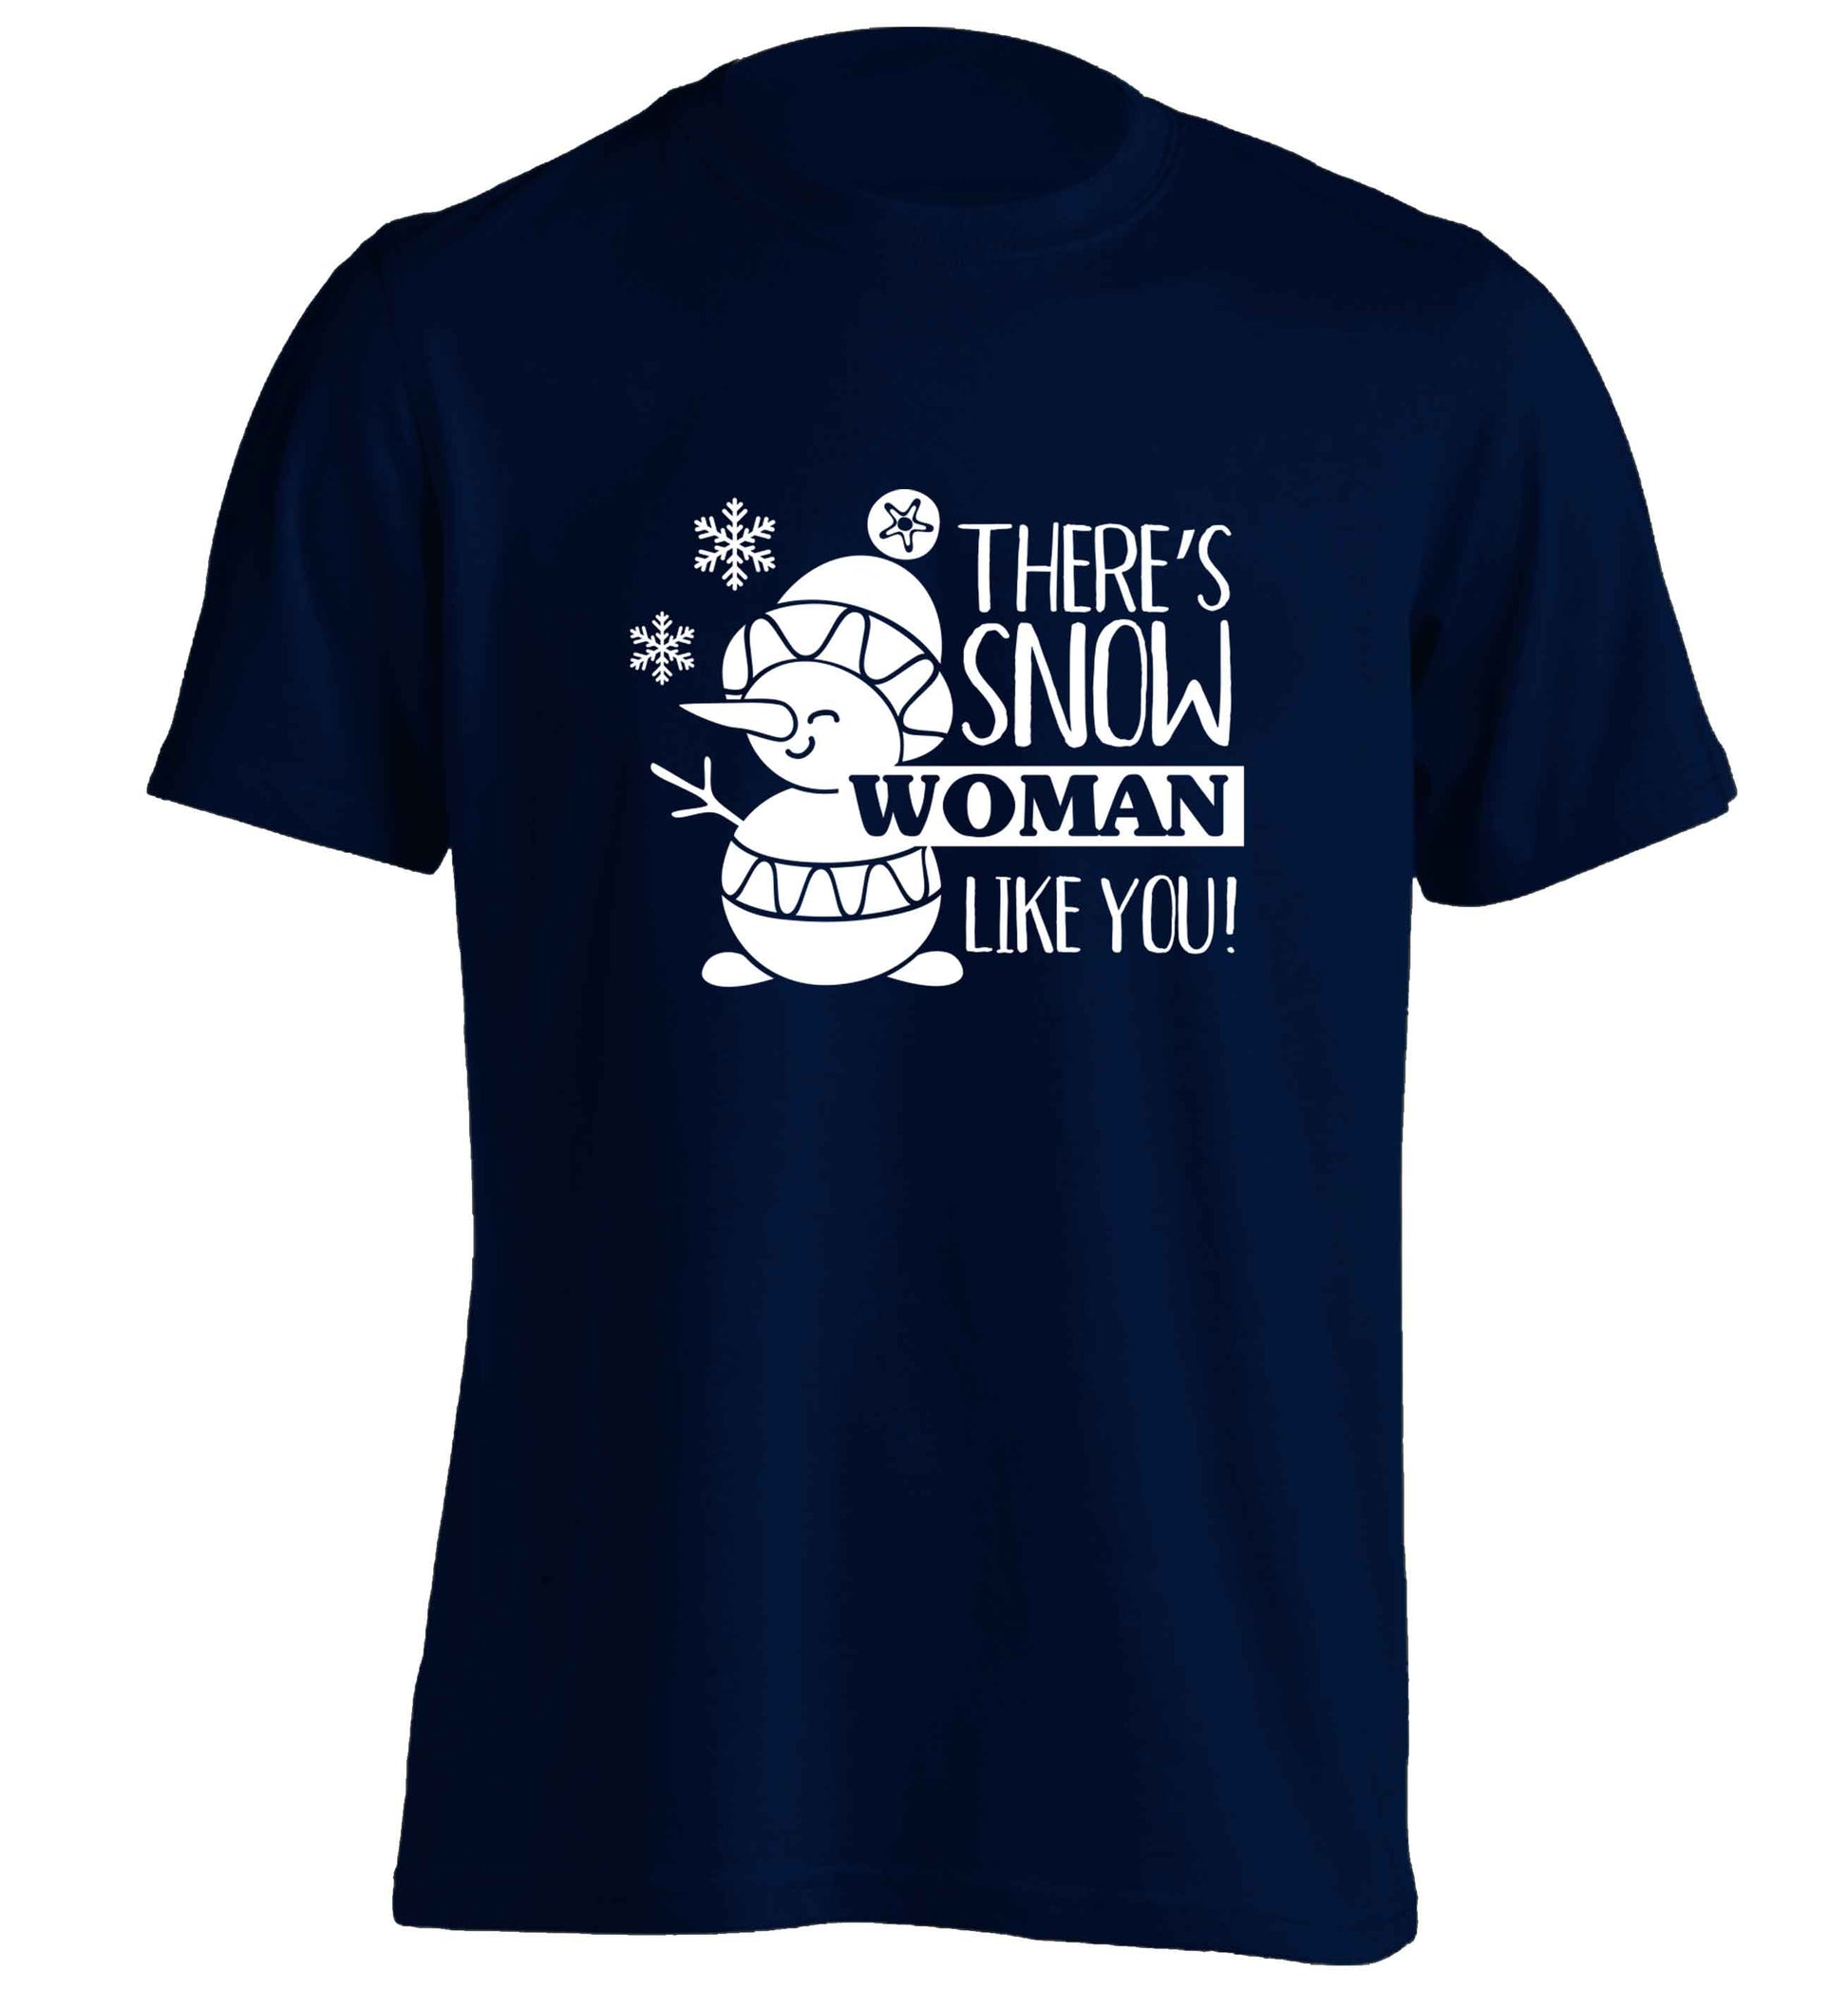 There's snow woman like you adults unisex navy Tshirt 2XL